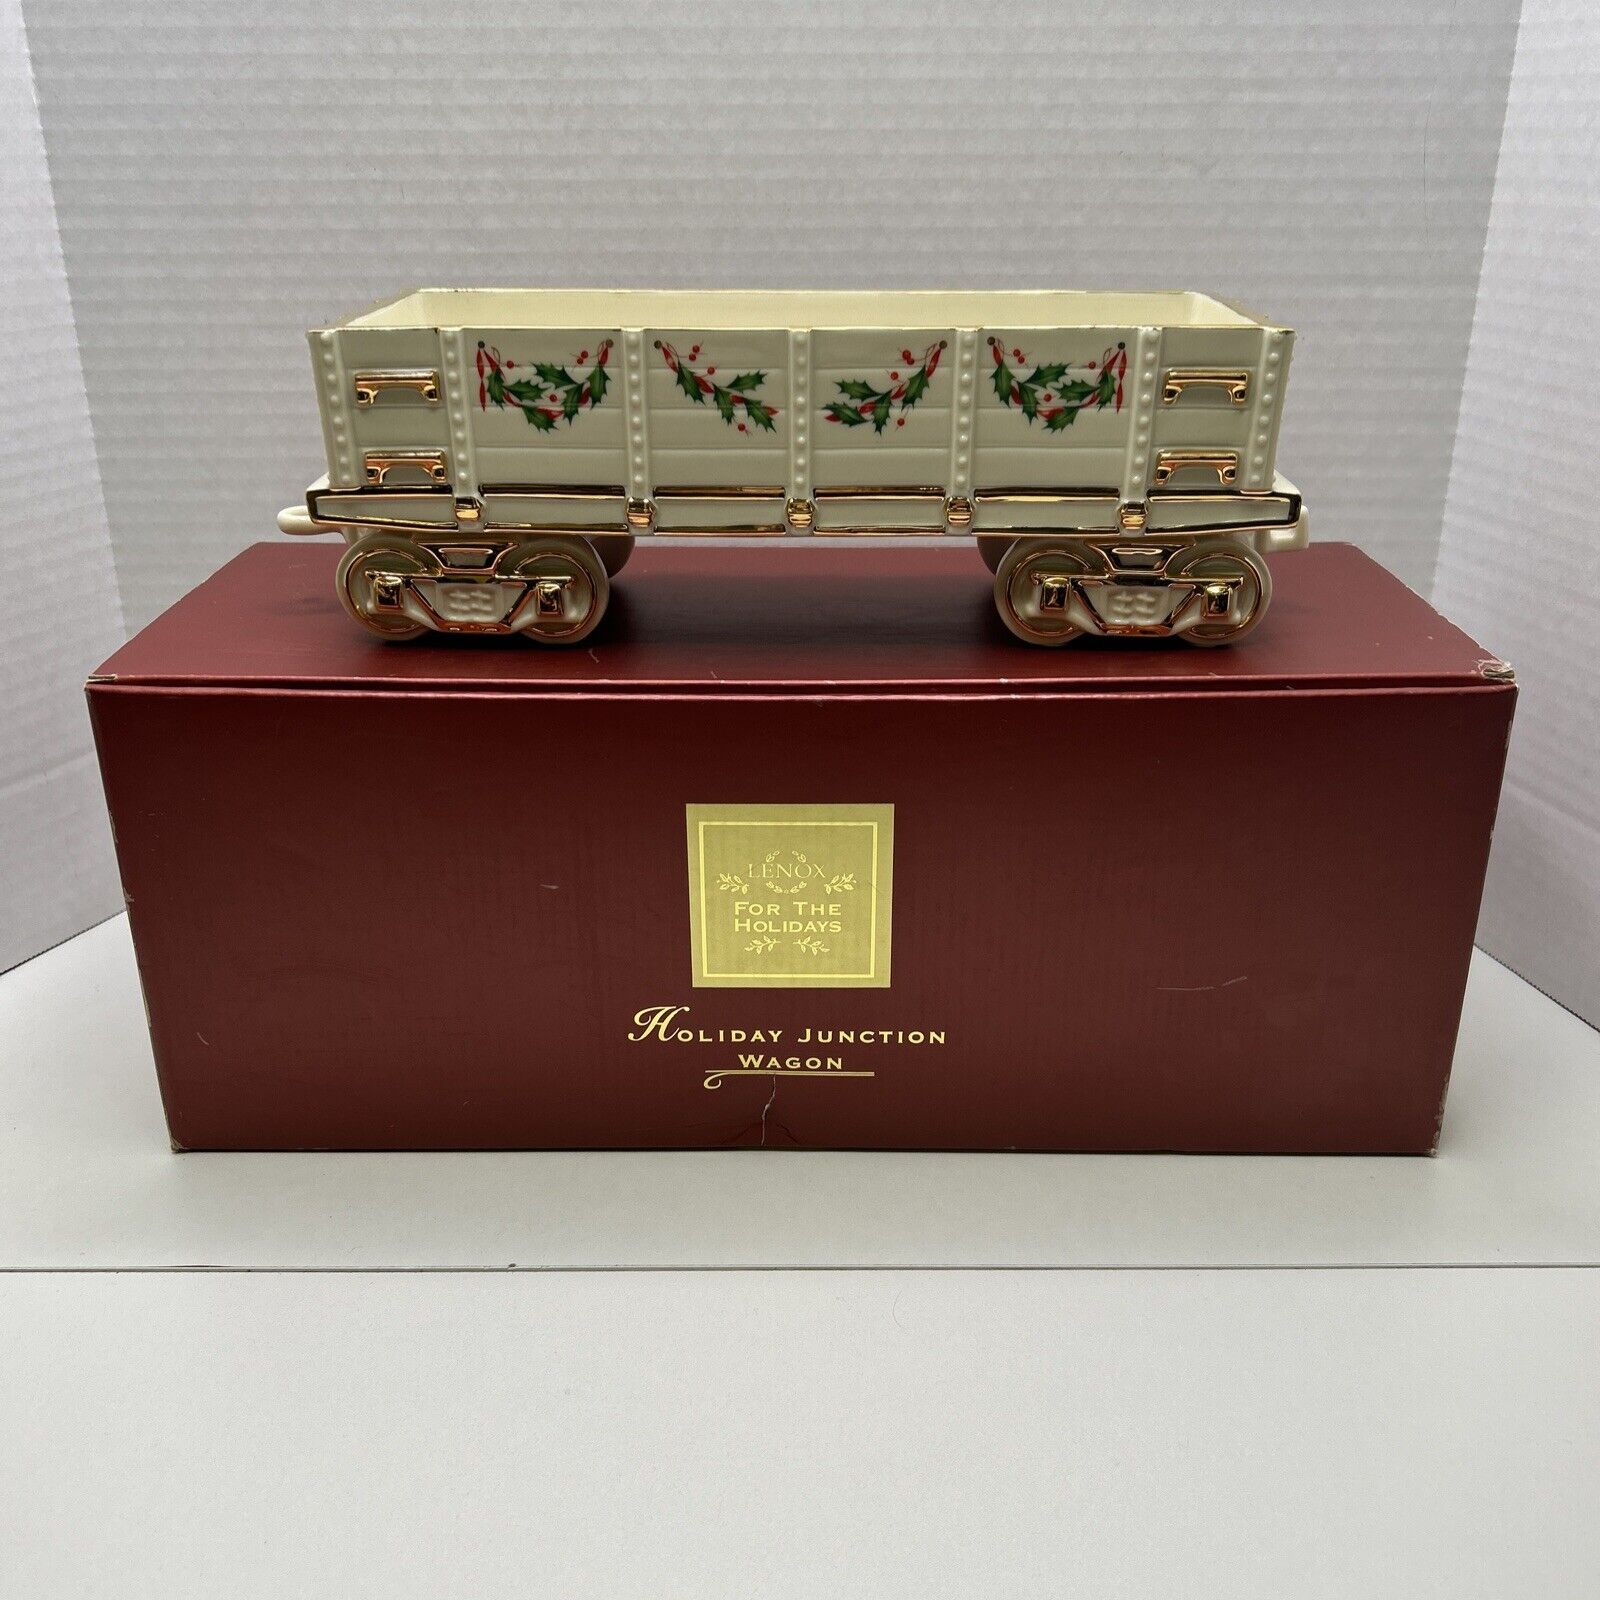 Lenox For The Holidays, Holiday Junction Train Wagon With Original Box